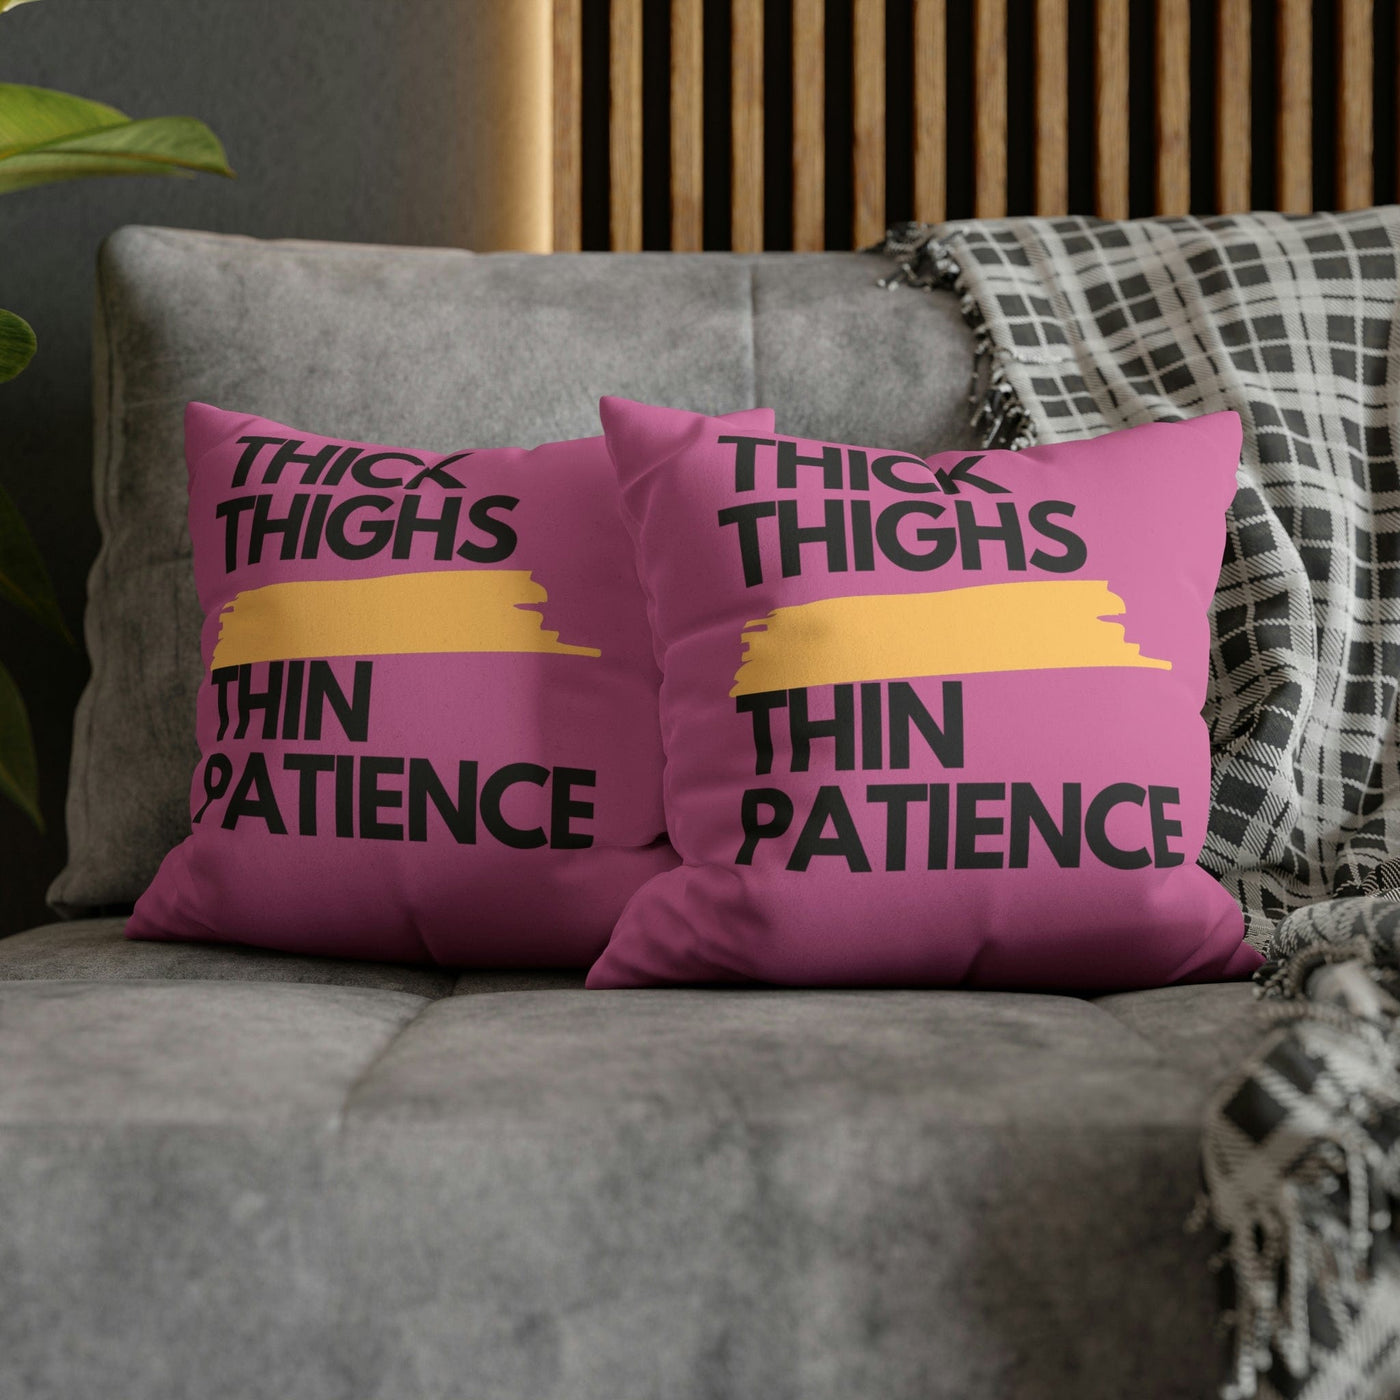 The "Thick Thigh" | Thin Patience | Light Pink Pillow